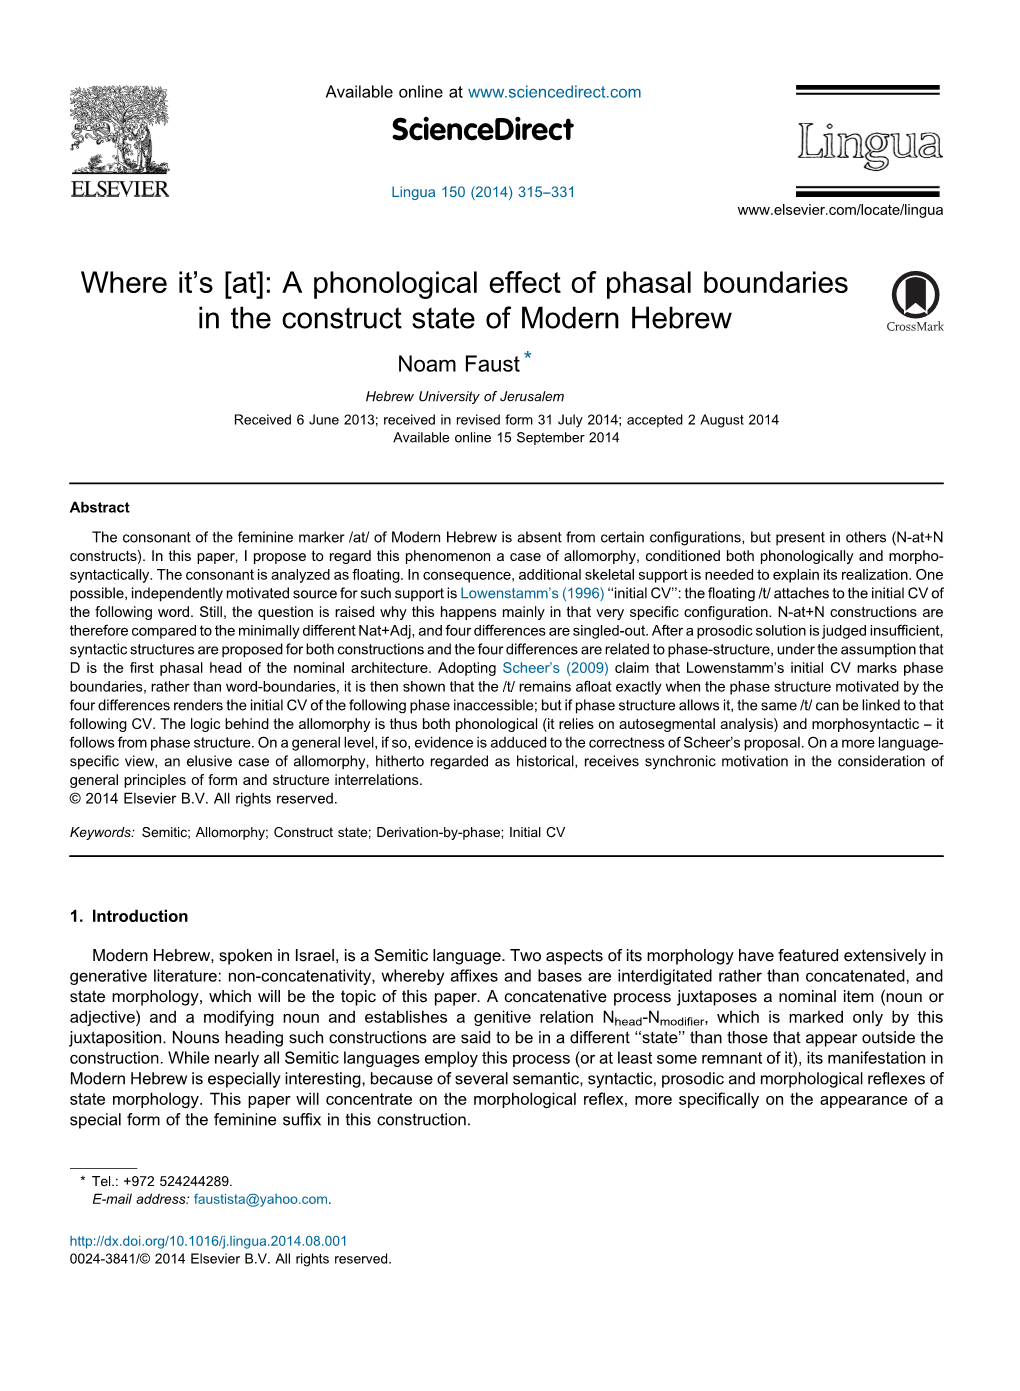 A Phonological Effect of Phasal Boundaries in the Construct State Of